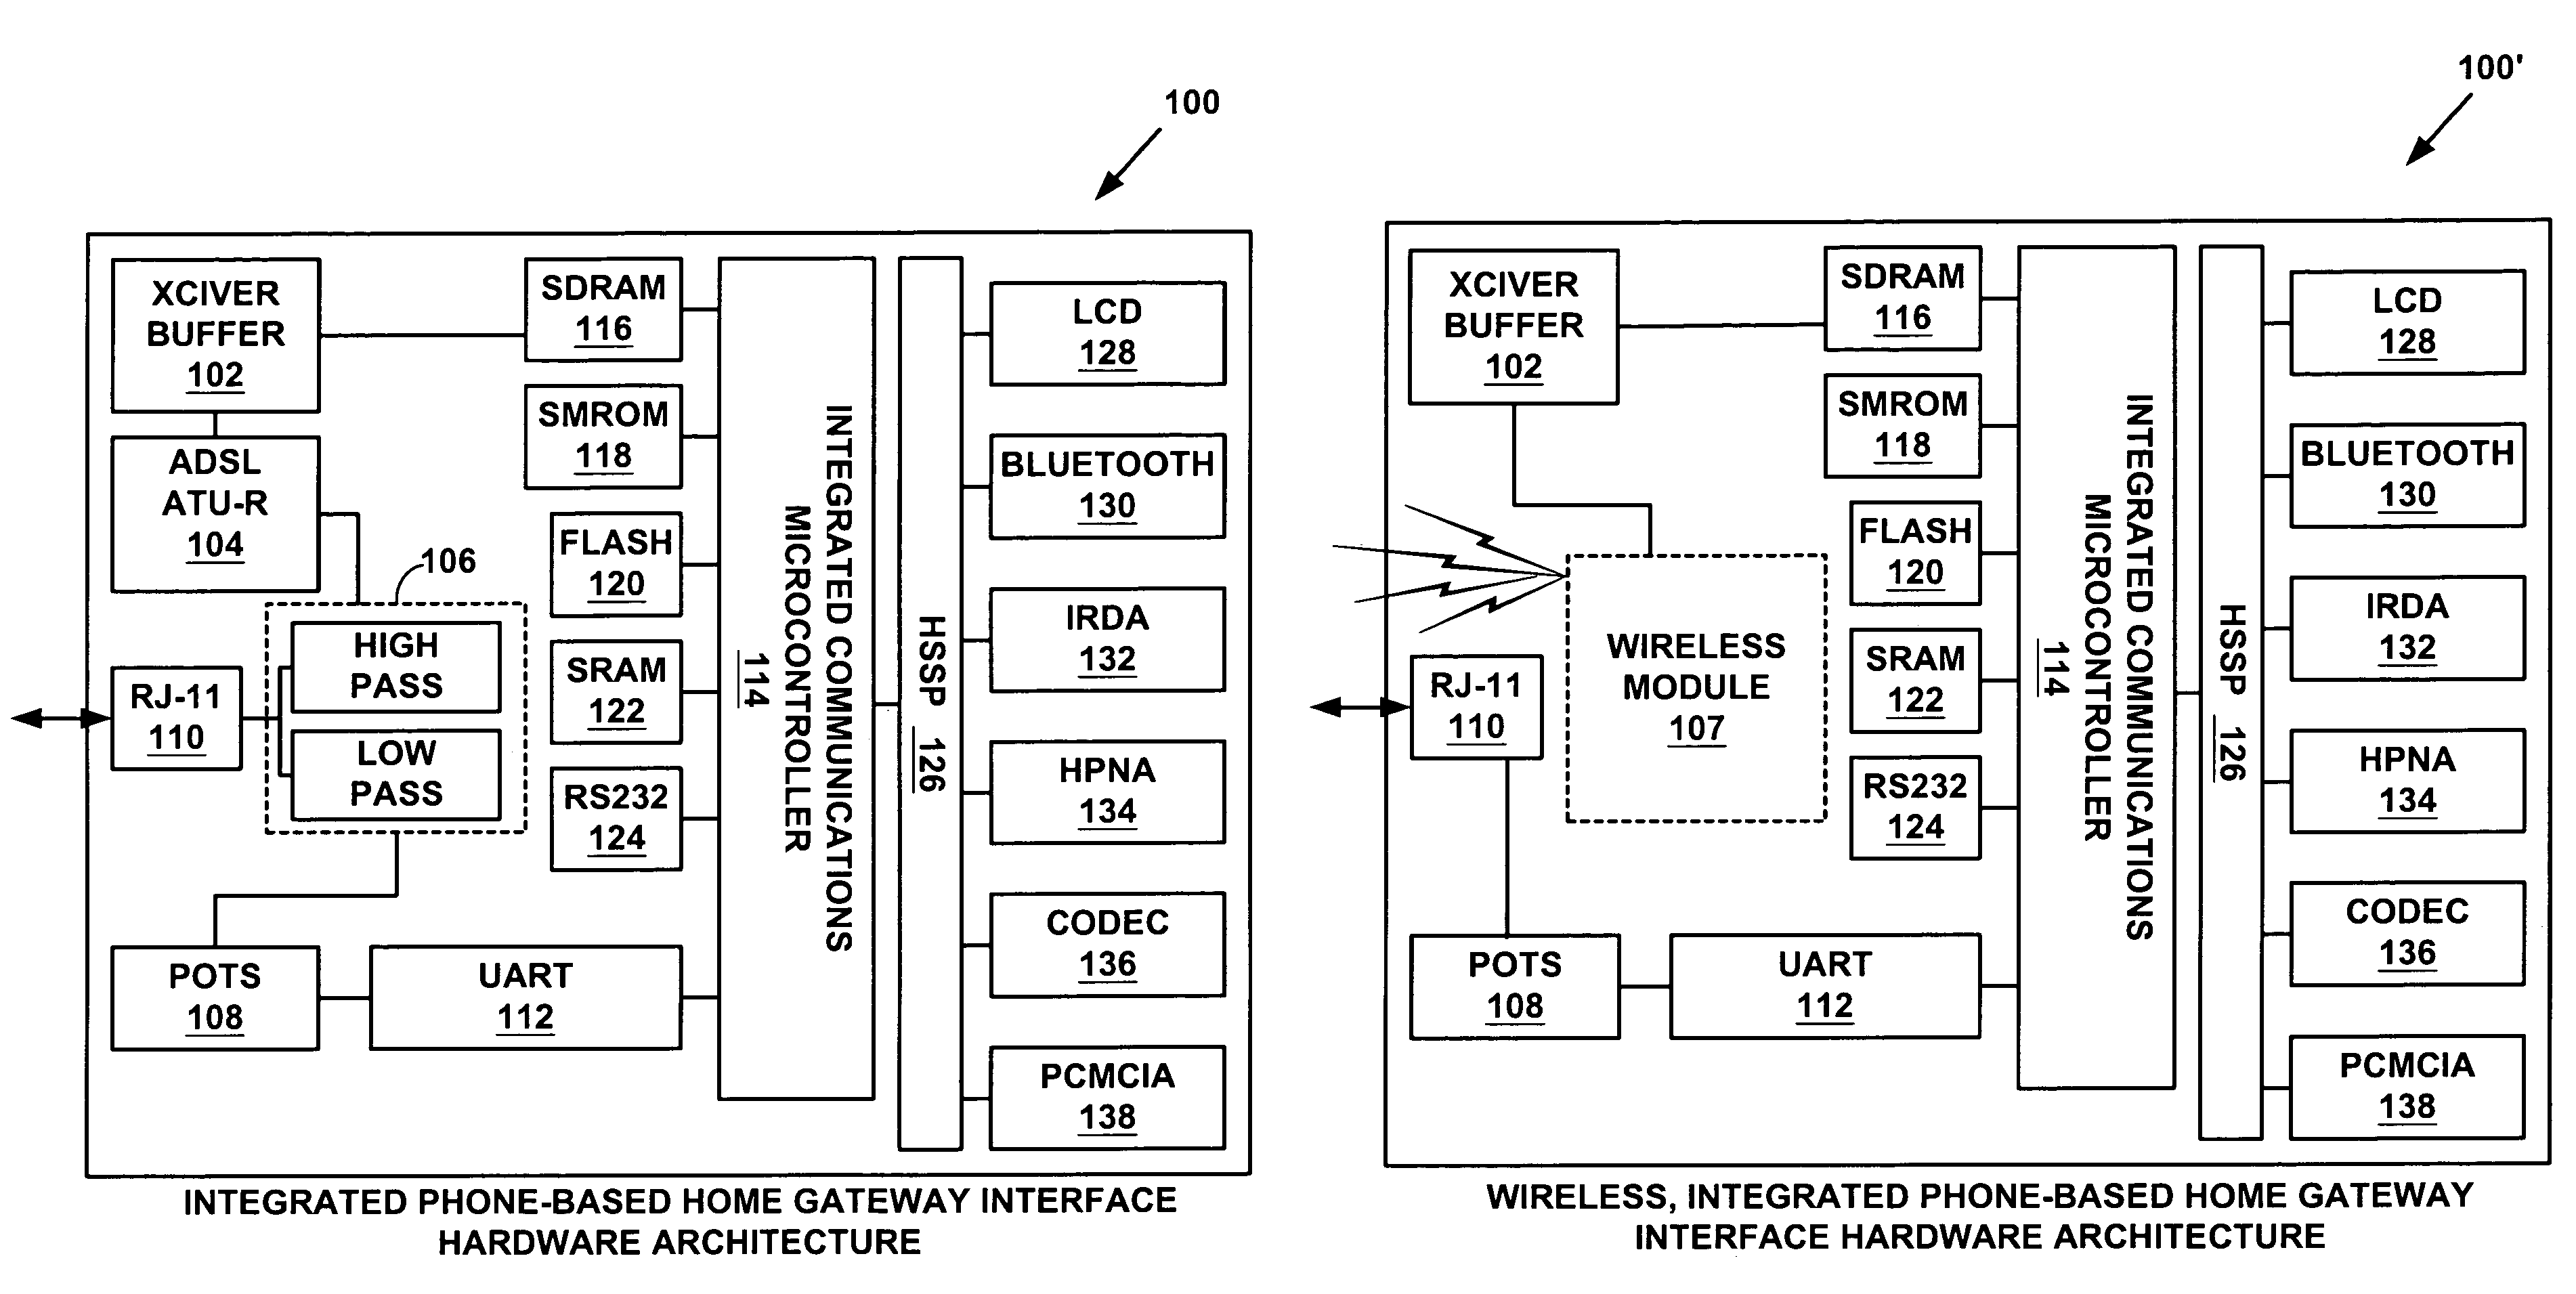 Integrated phone-based home gateway system with a broadband communication device